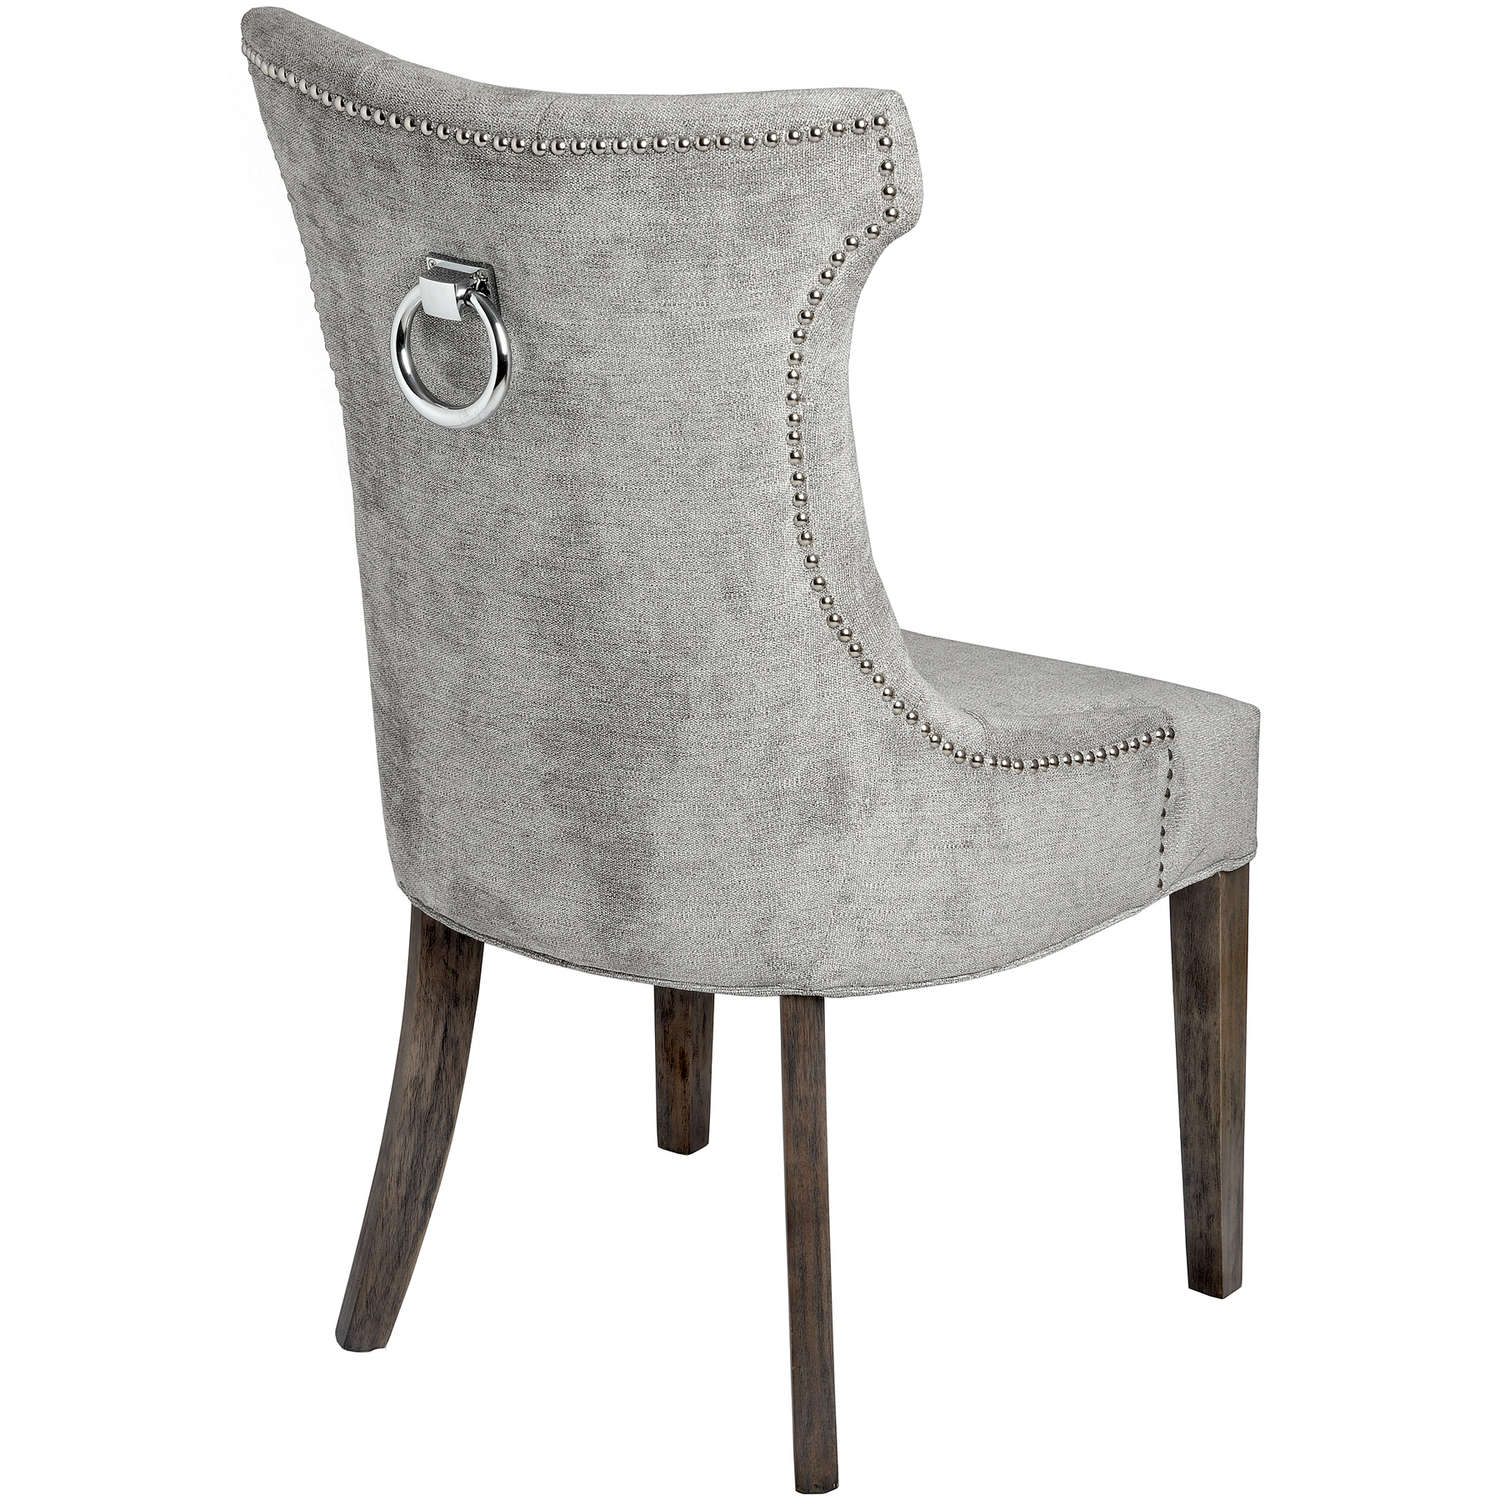 Silver High Wing Ring Backed Dining Chair - Image 2